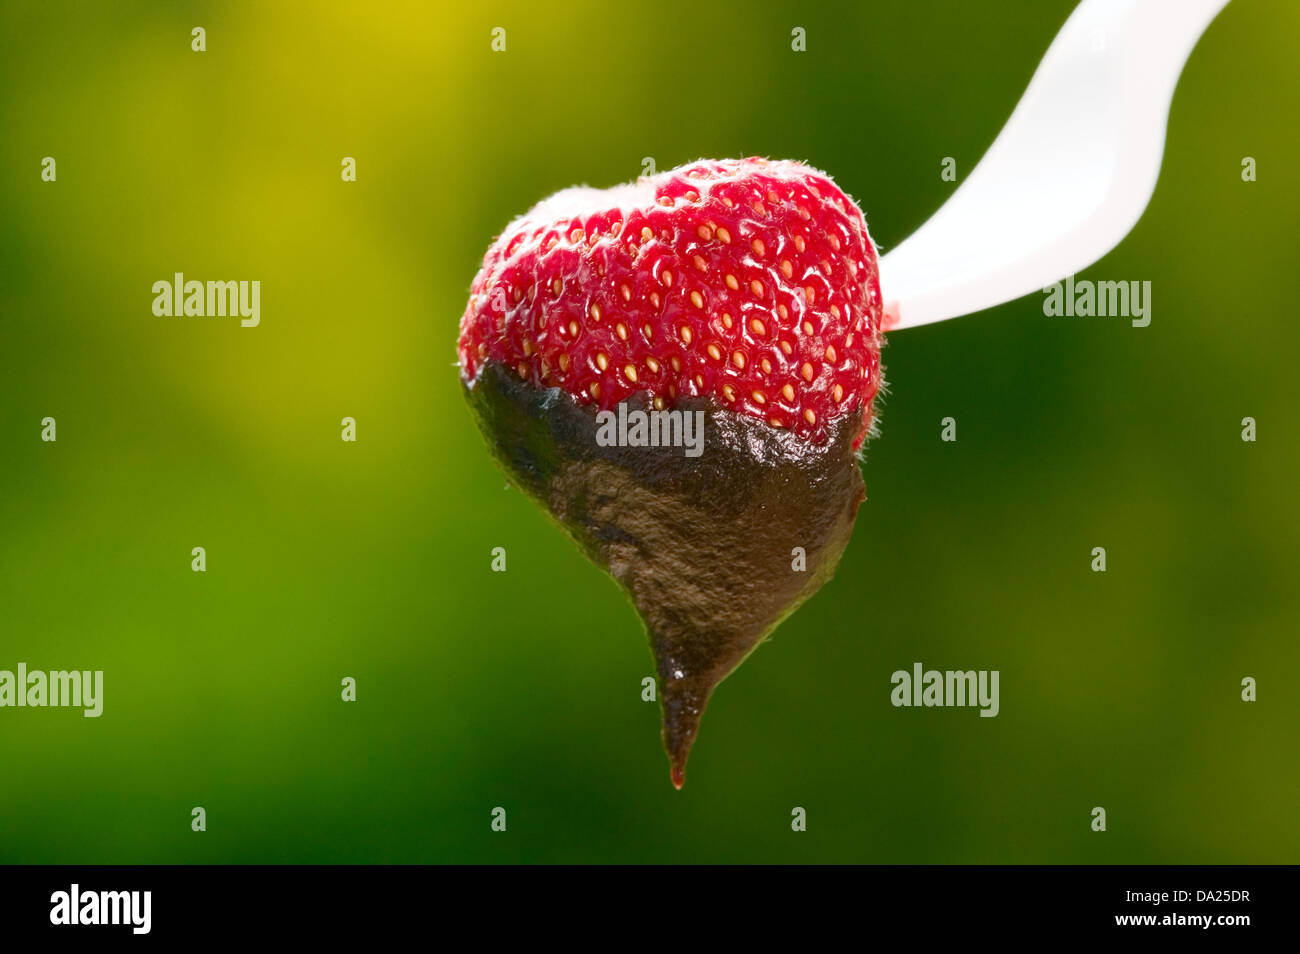 Red strawberry with chocolate on green nature background Stock Photo